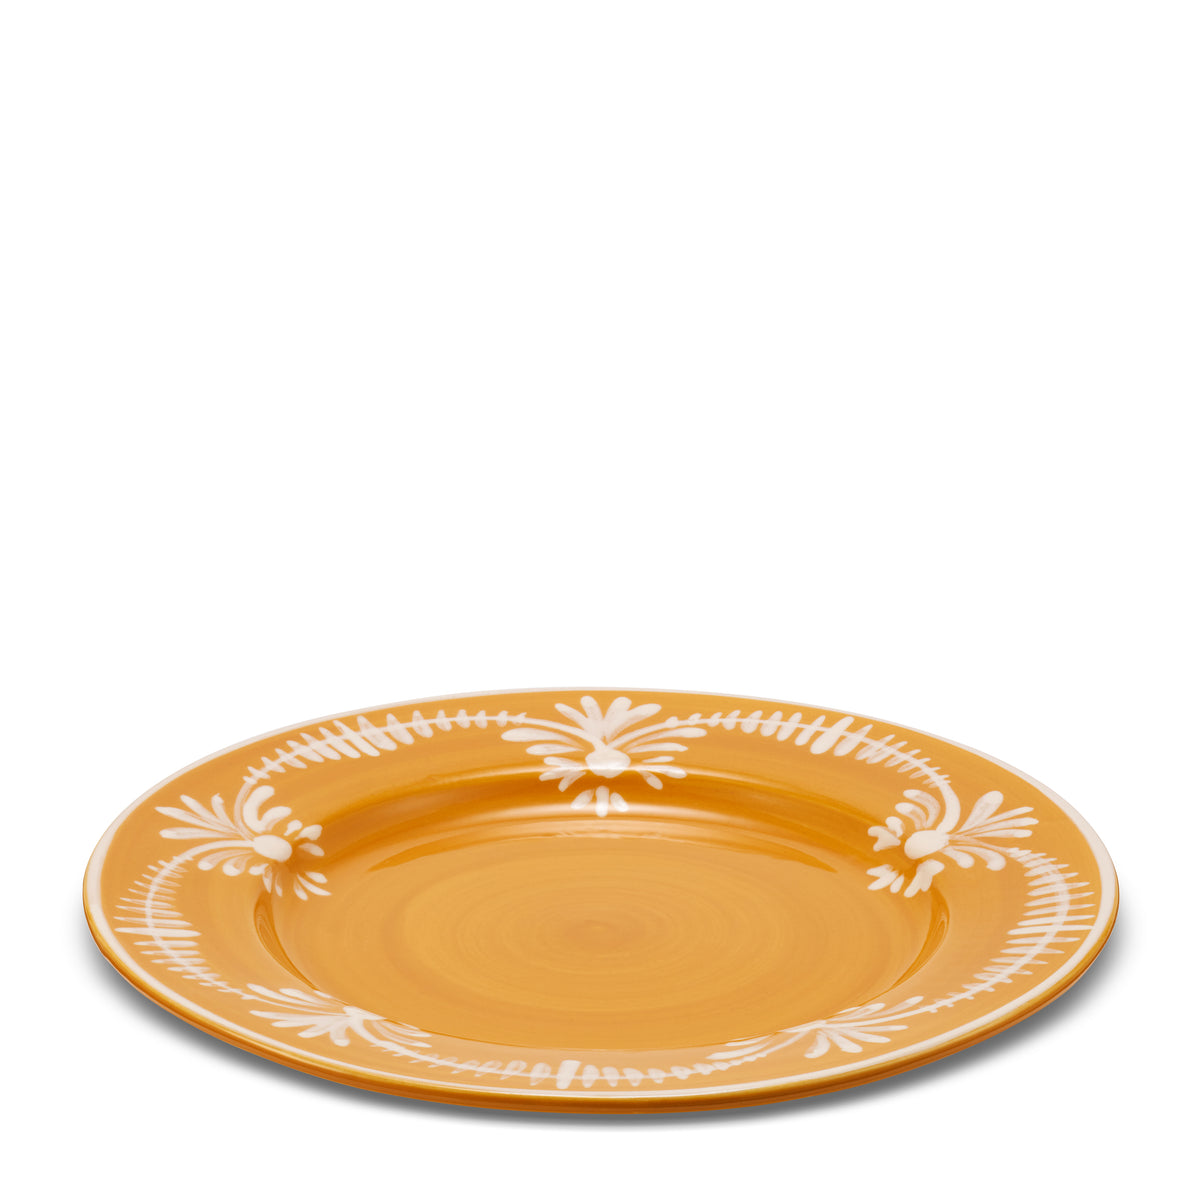 Dinner Plate With White Floral Trim in Marigold